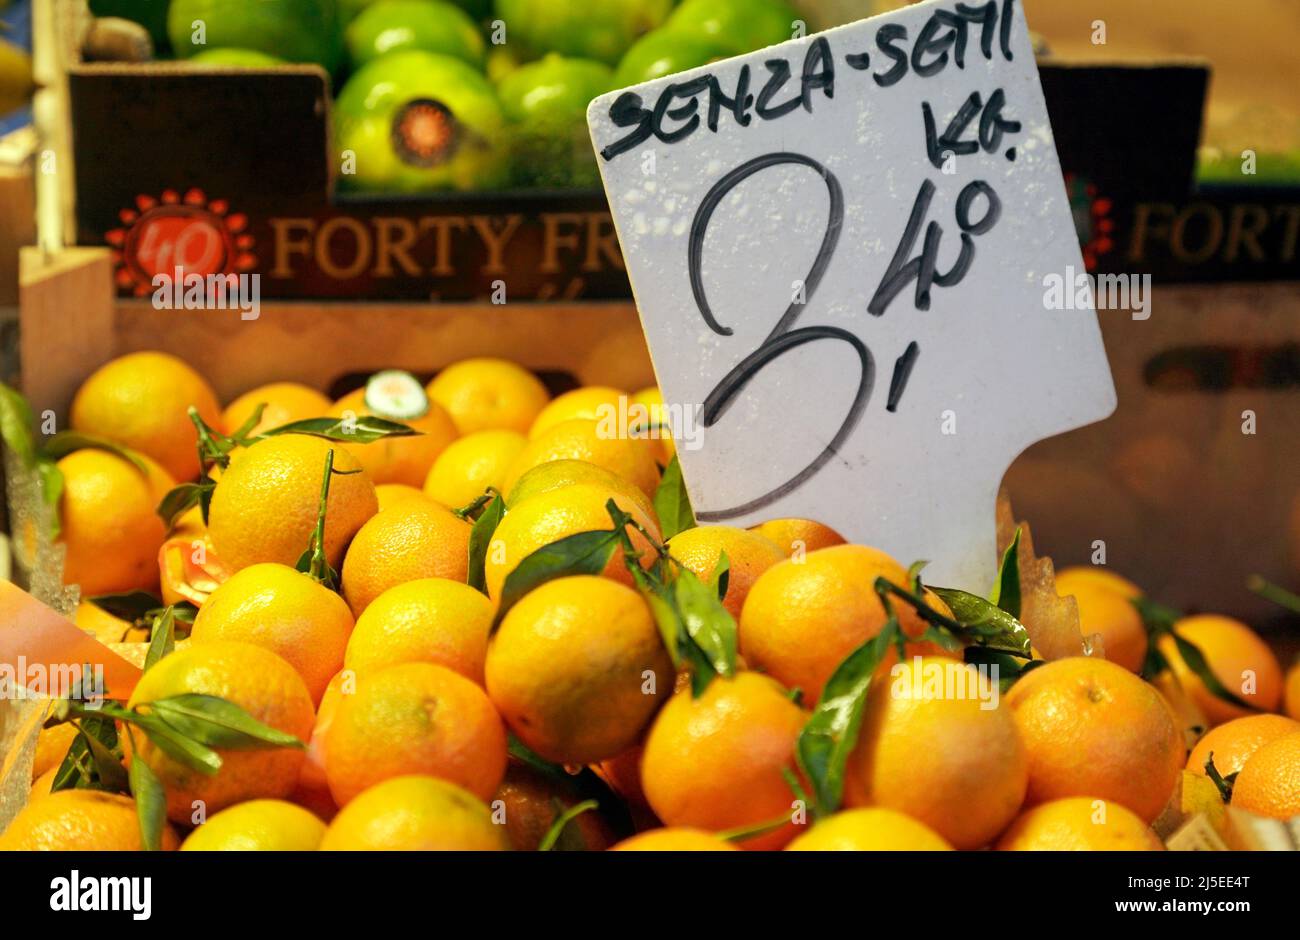 Clementines for sale in a market stand, Venice, Italy Stock Photo